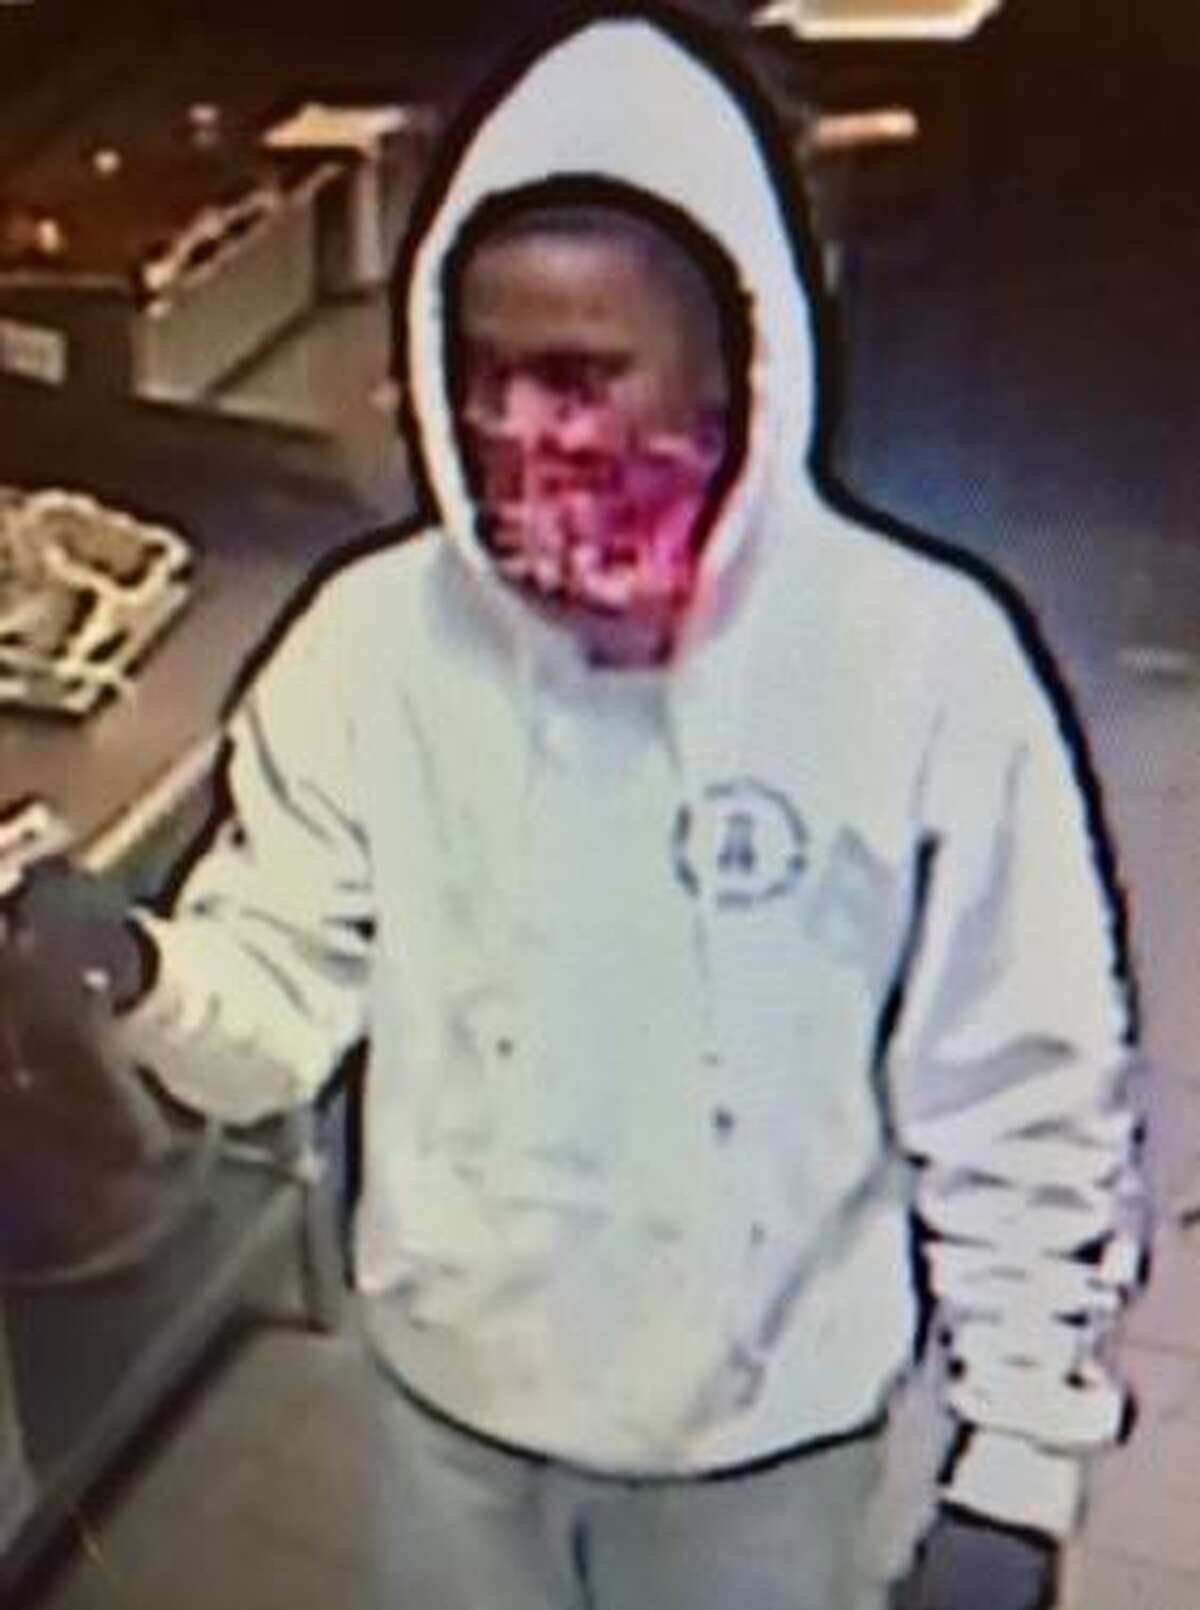 Police are looking for the suspect who robbed a Freddy's Frozen Custard and Steakburgersat gunpoint on Jan. 26, 2017, in the city's North Side.